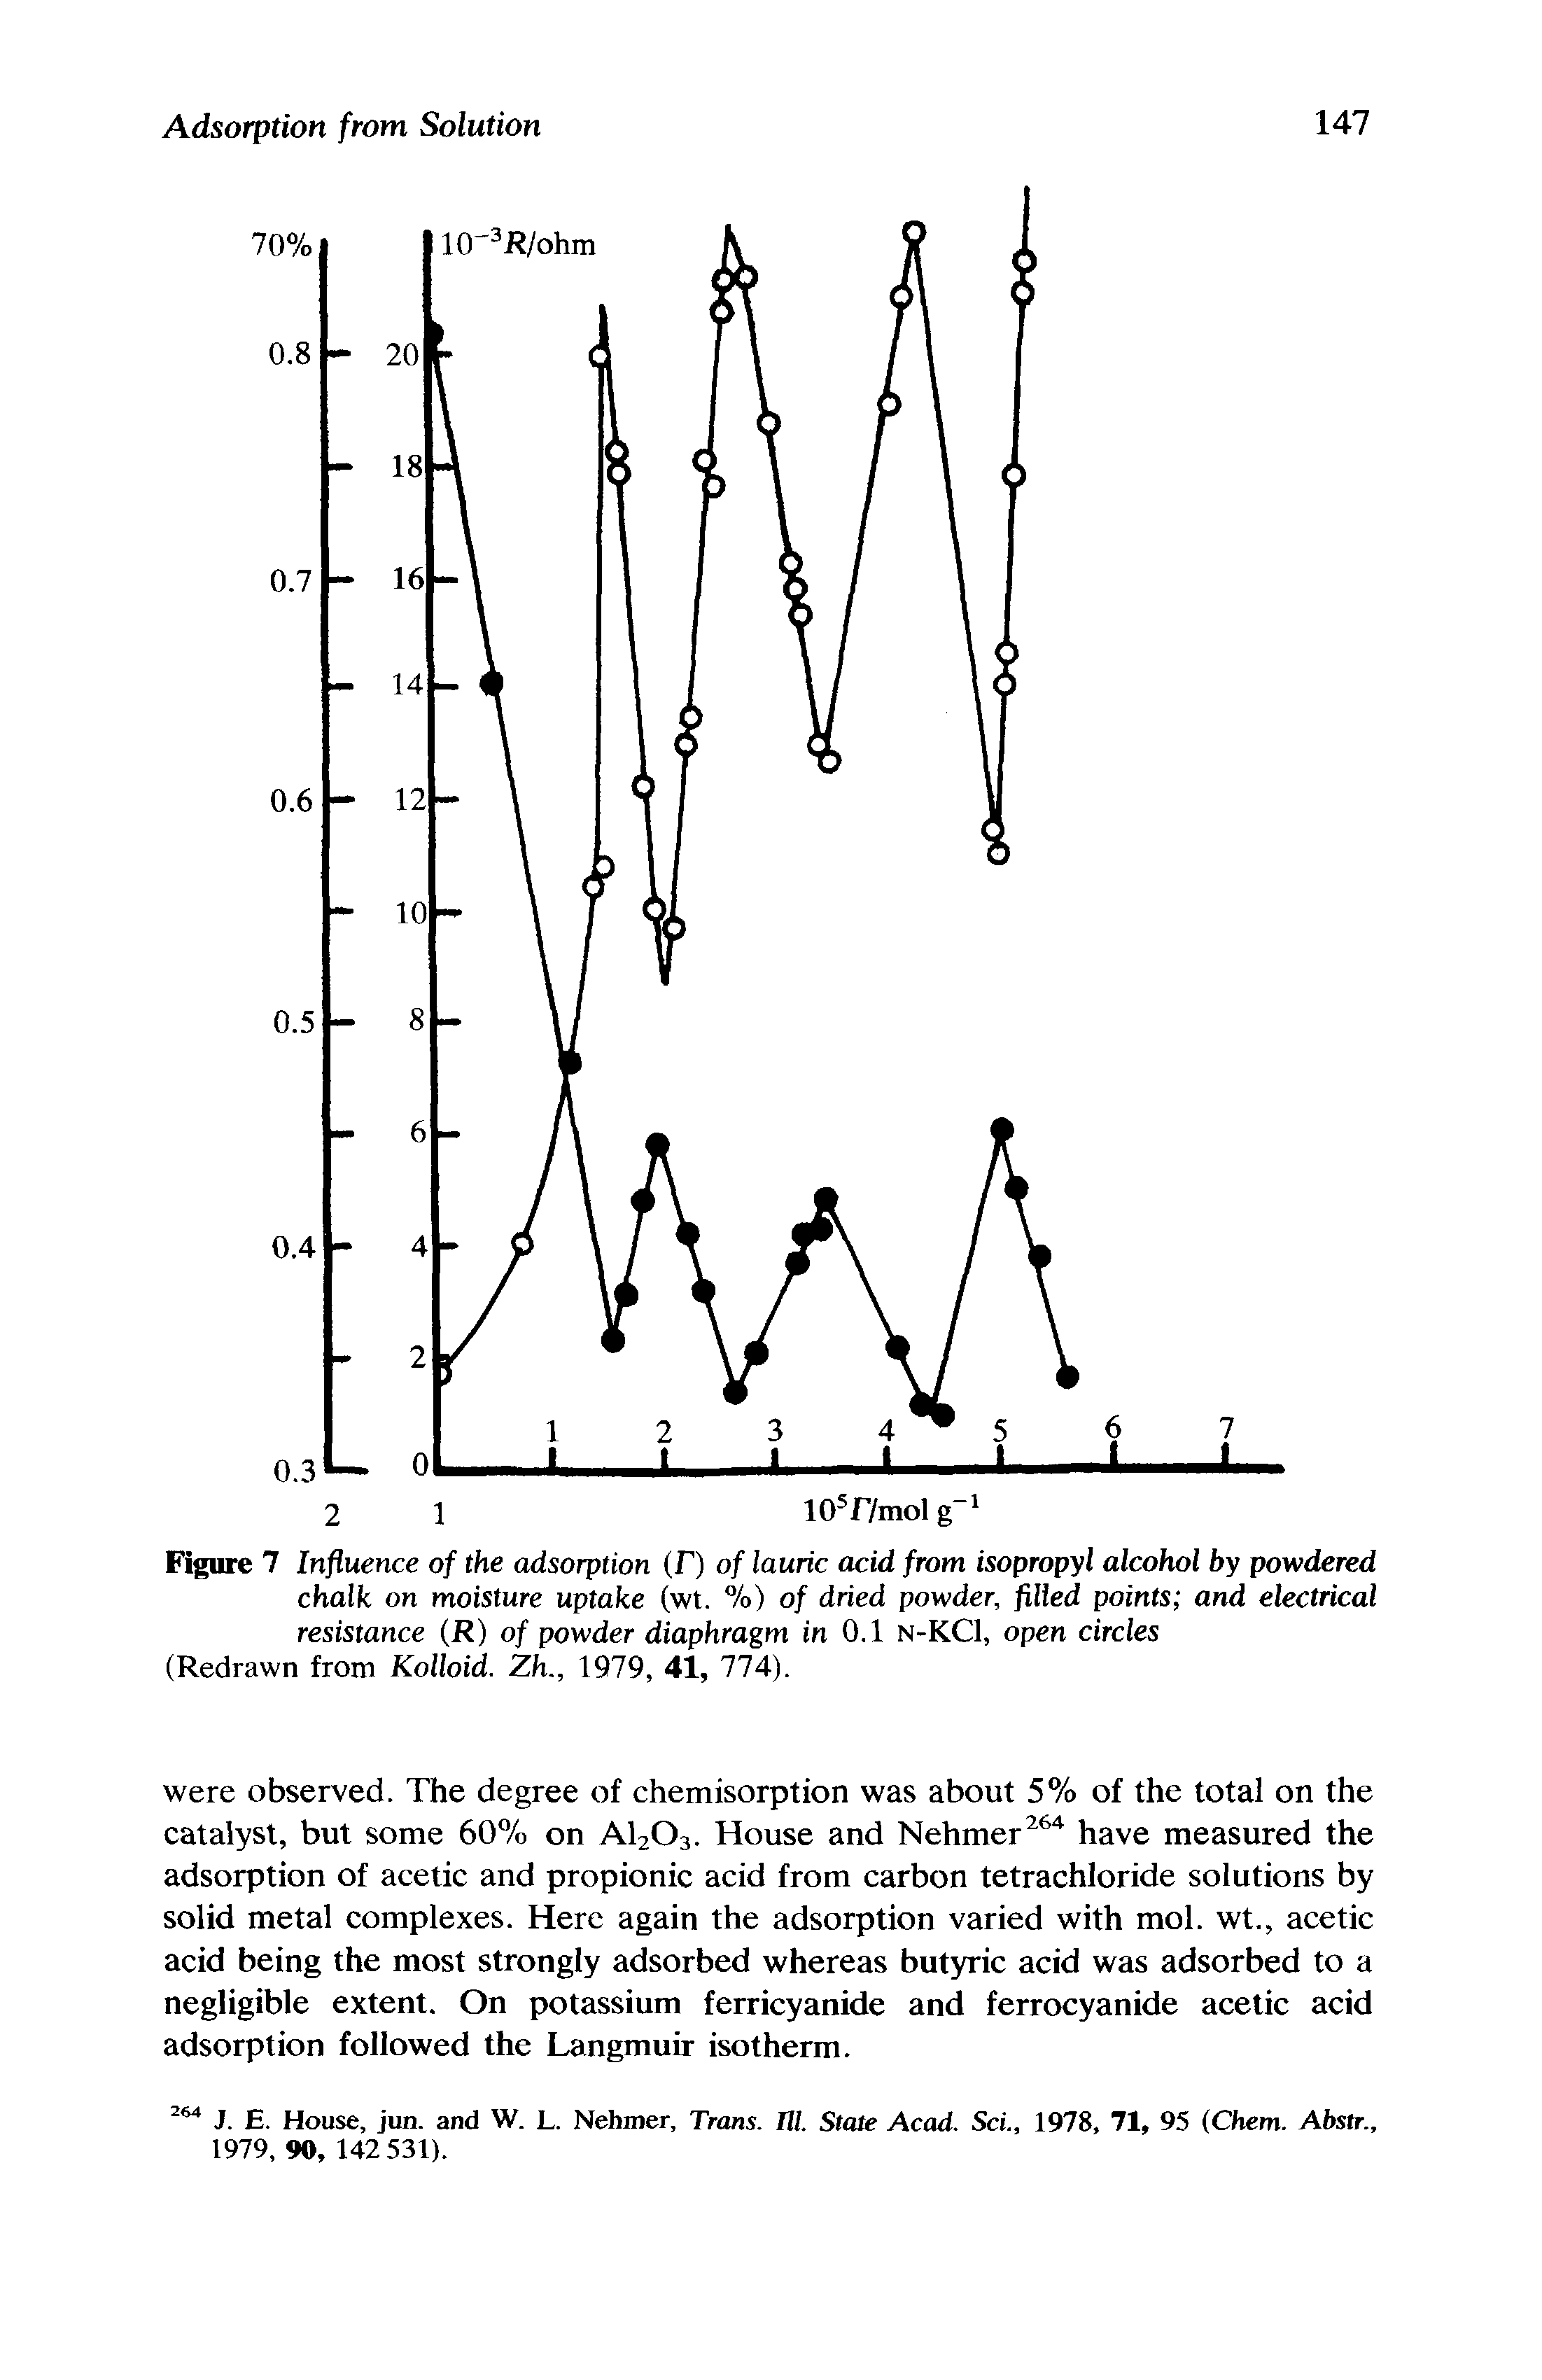 Figure 7 Influence of the adsorption (F) of lauric acid from isopropyl alcohol by powdered chalk on moisture uptake (wt. %) of dried powder, filled points and electrical resistance (R) of powder diaphragm in 0.1 n-KCI, open circles (Redrawn from Kolloid. Zh., 1979, 41, 774).